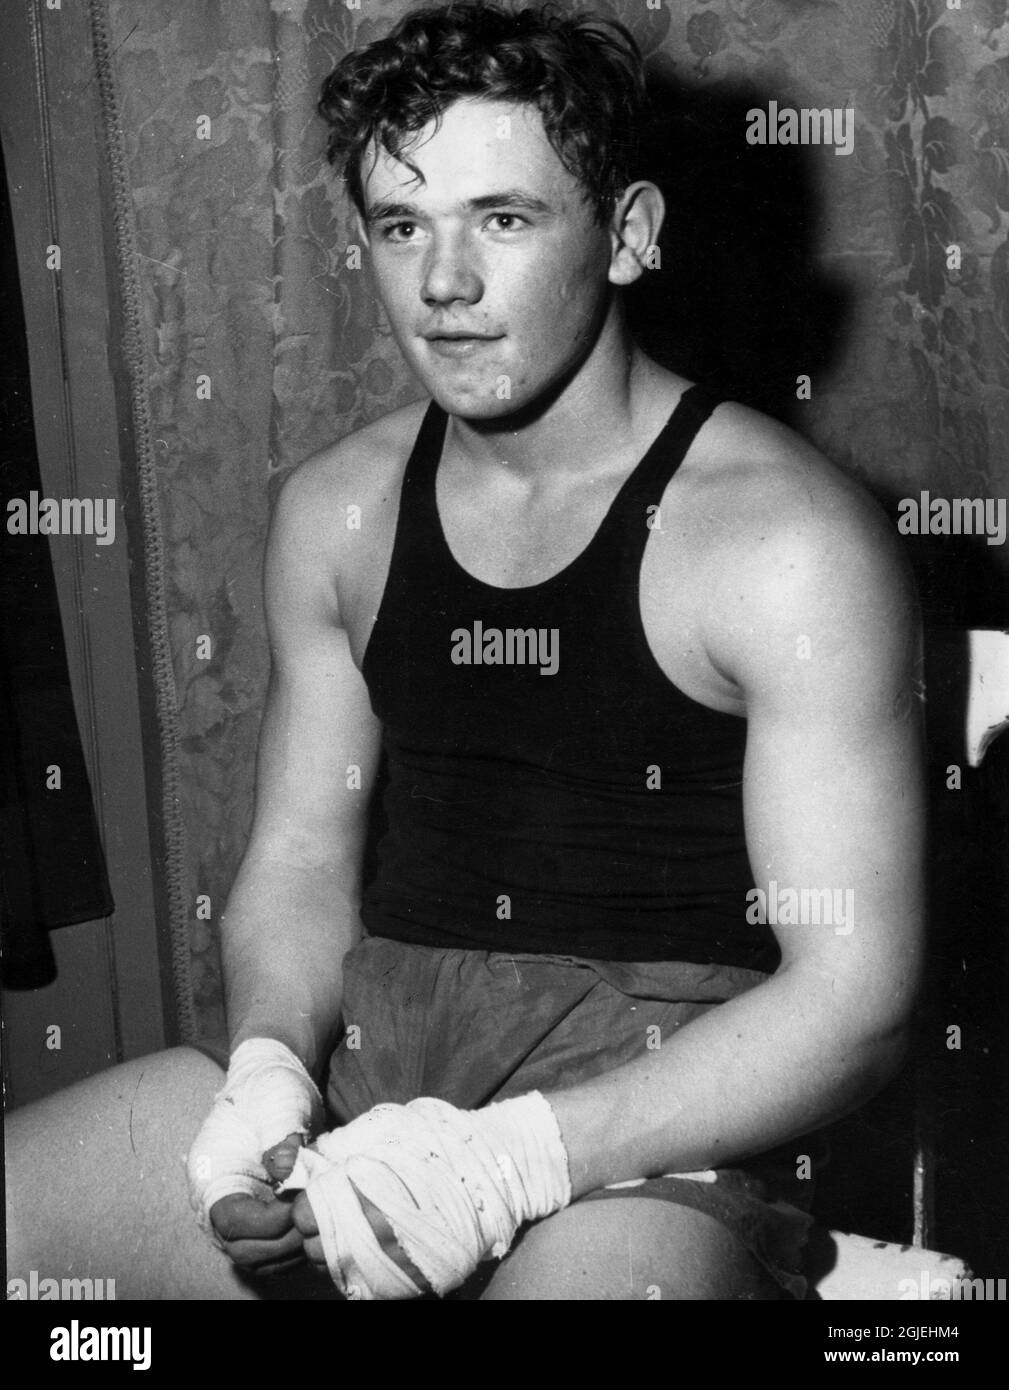 Swedish heavyweight boxing champion Ingemar Johansson pictured as a 15-year  old in 1947 after his boxing debut Stock Photo - Alamy